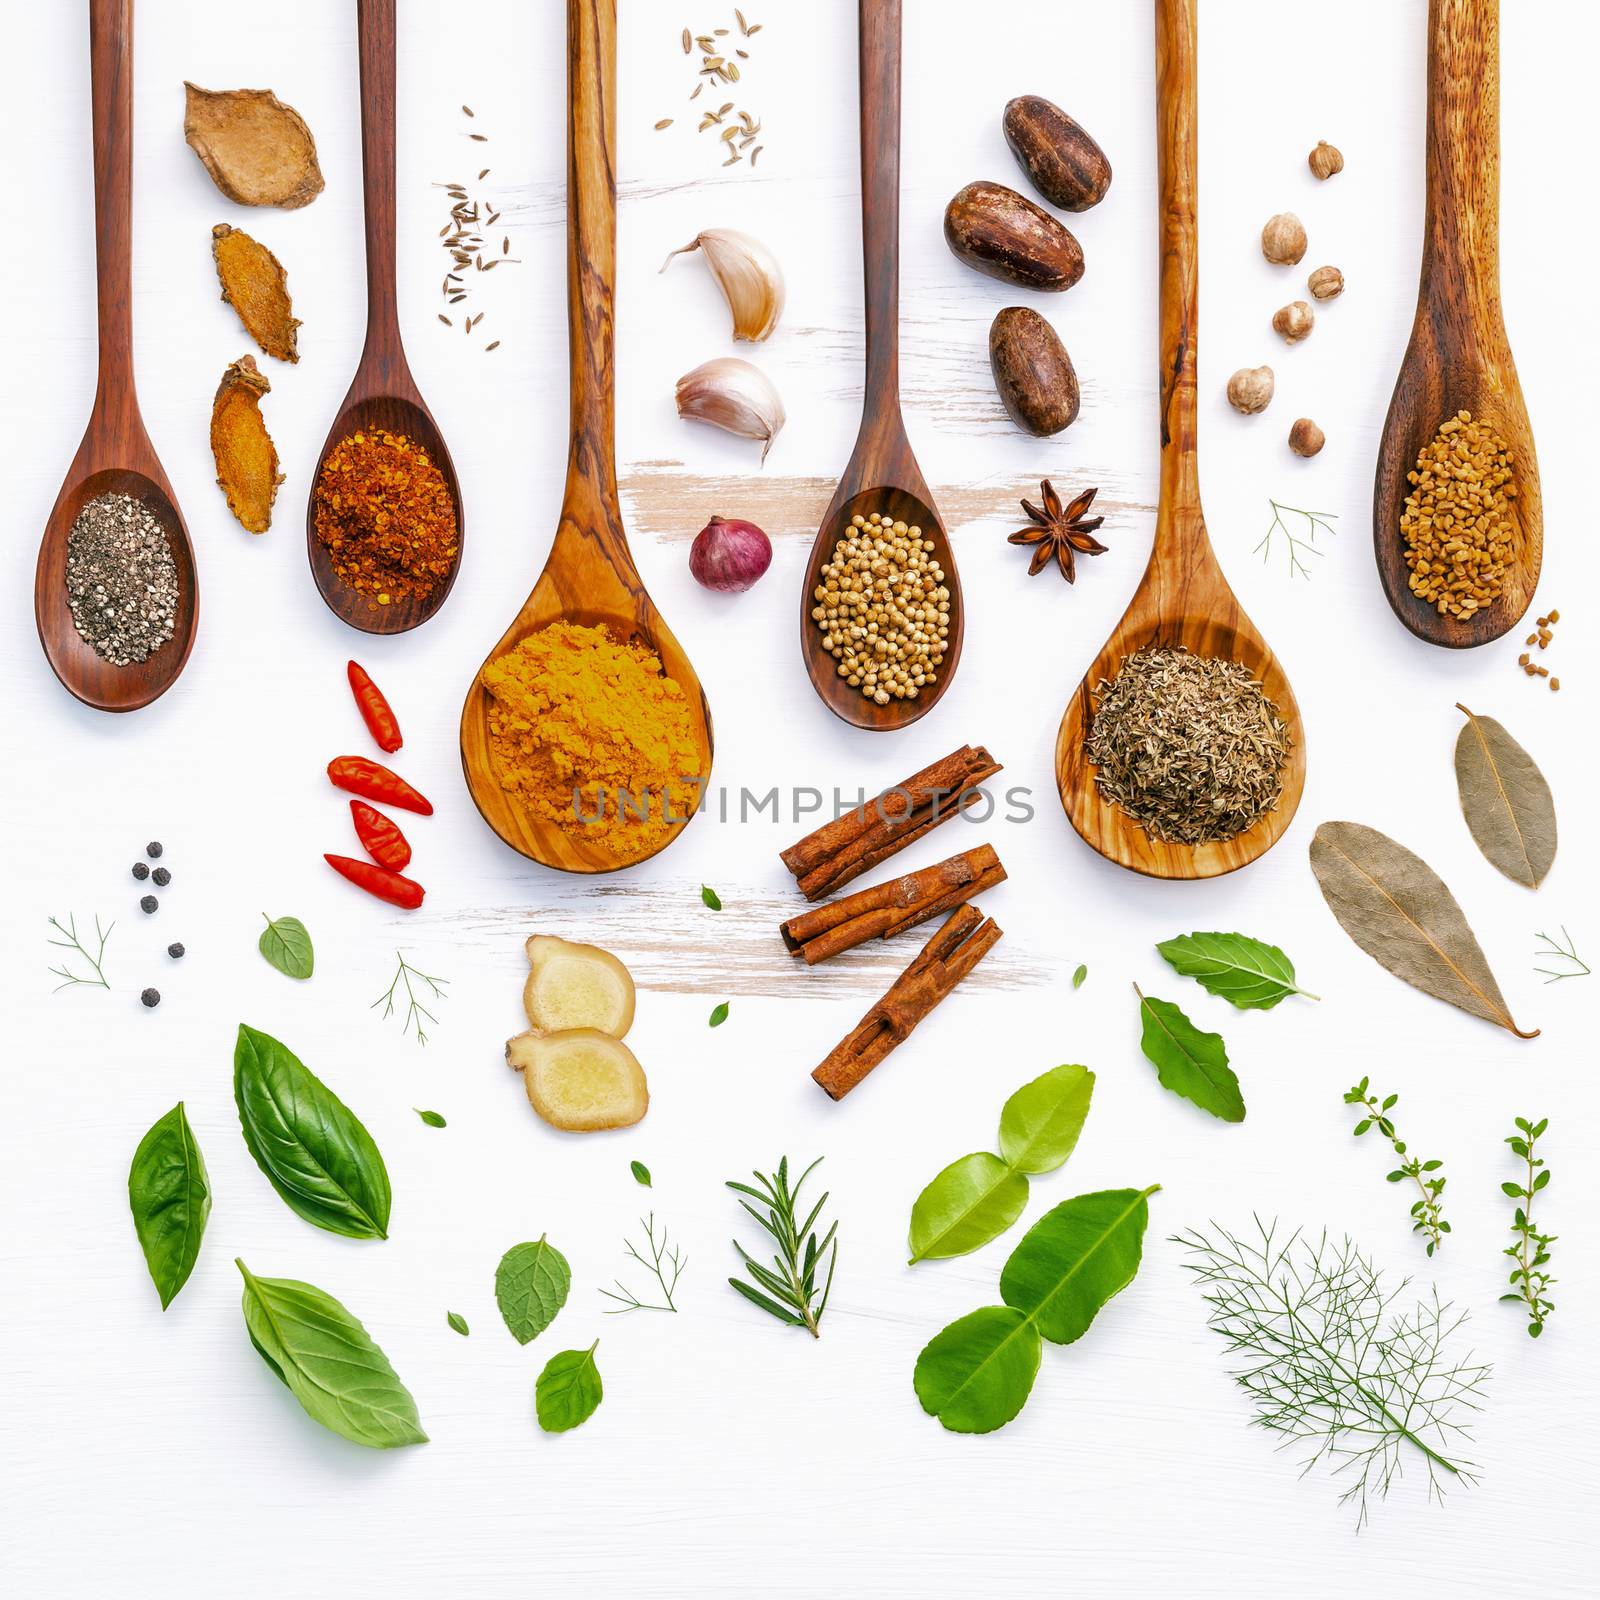 Various herbs and spices in wooden spoons. Flat lay of spices in by kerdkanno